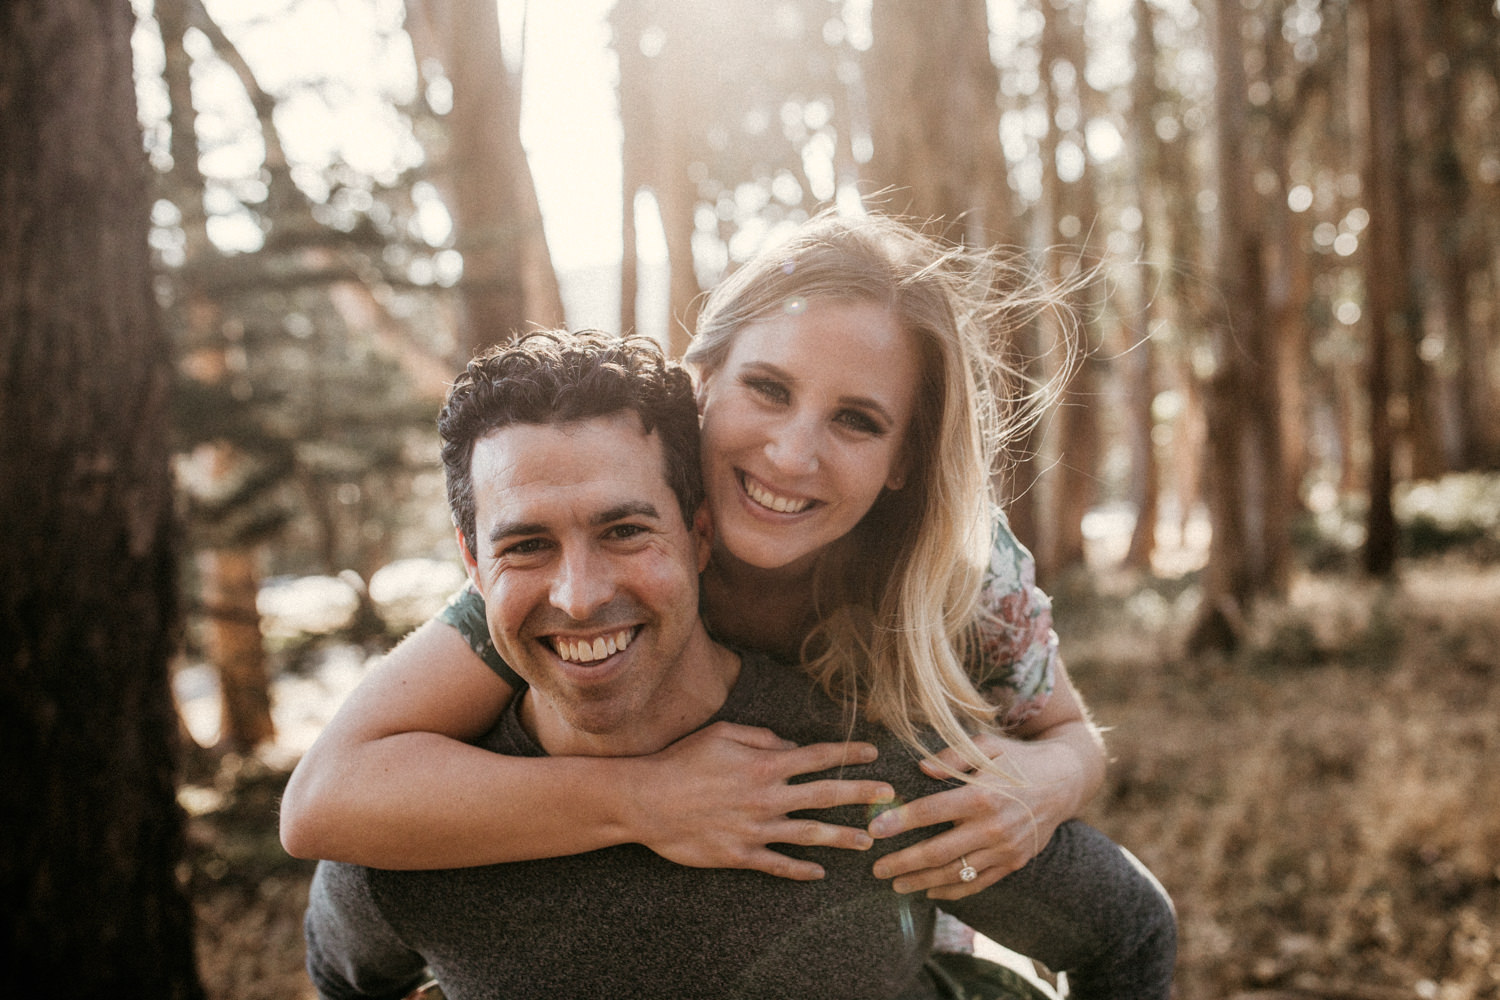 San Francisco Lovers Lane Engagement Session couples posing inspo engagement session outfit Inspo free spirit engagement photos wild and free engagement session bay area bride dark and grainy edits Rachel christopherson Photography